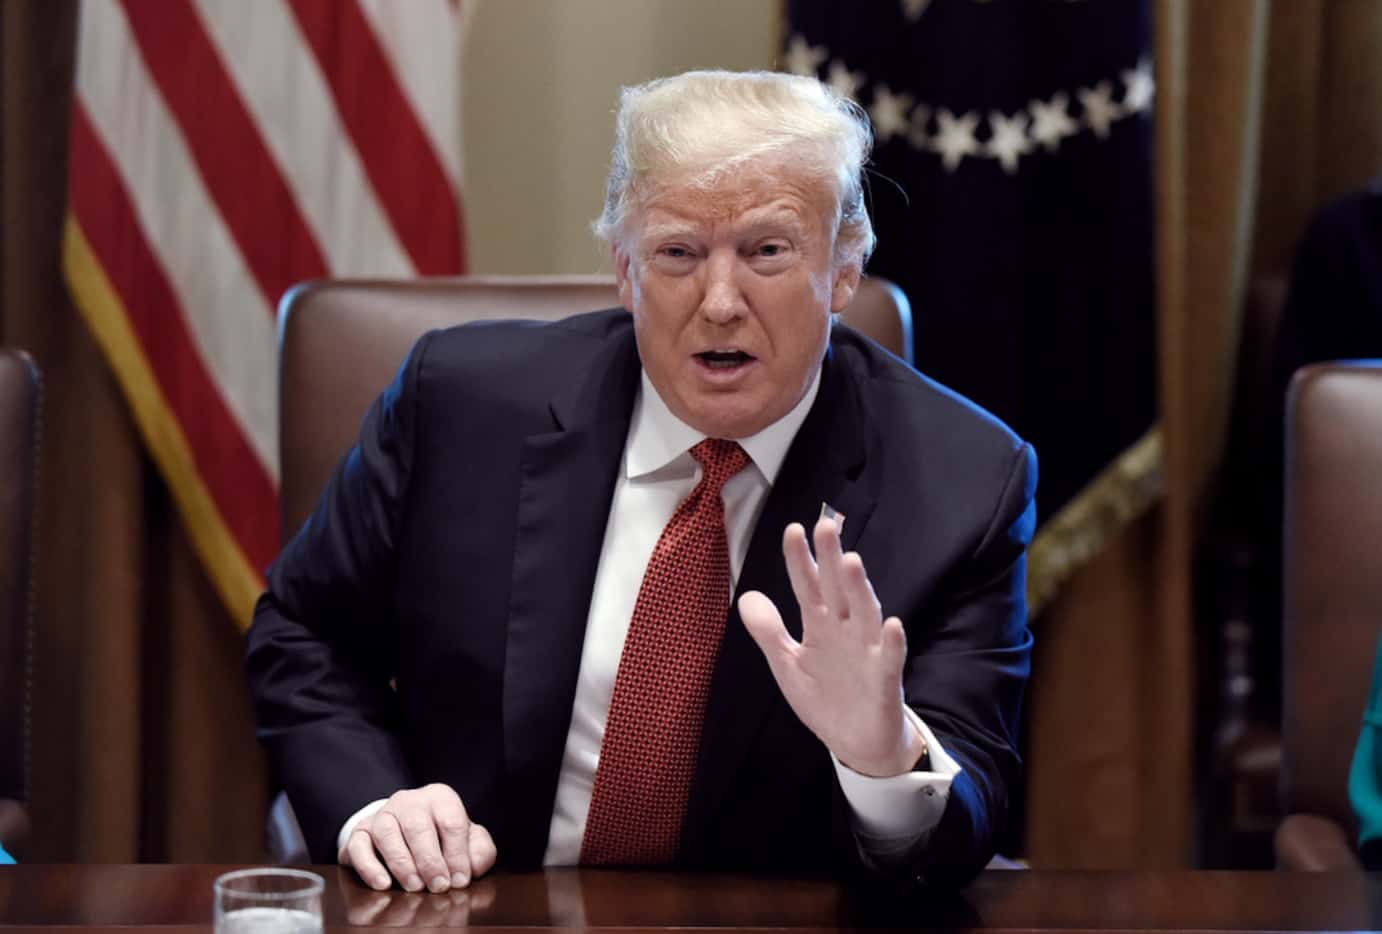 President Donald Trump has defended his use of tariffs, touting the impact they've had on...